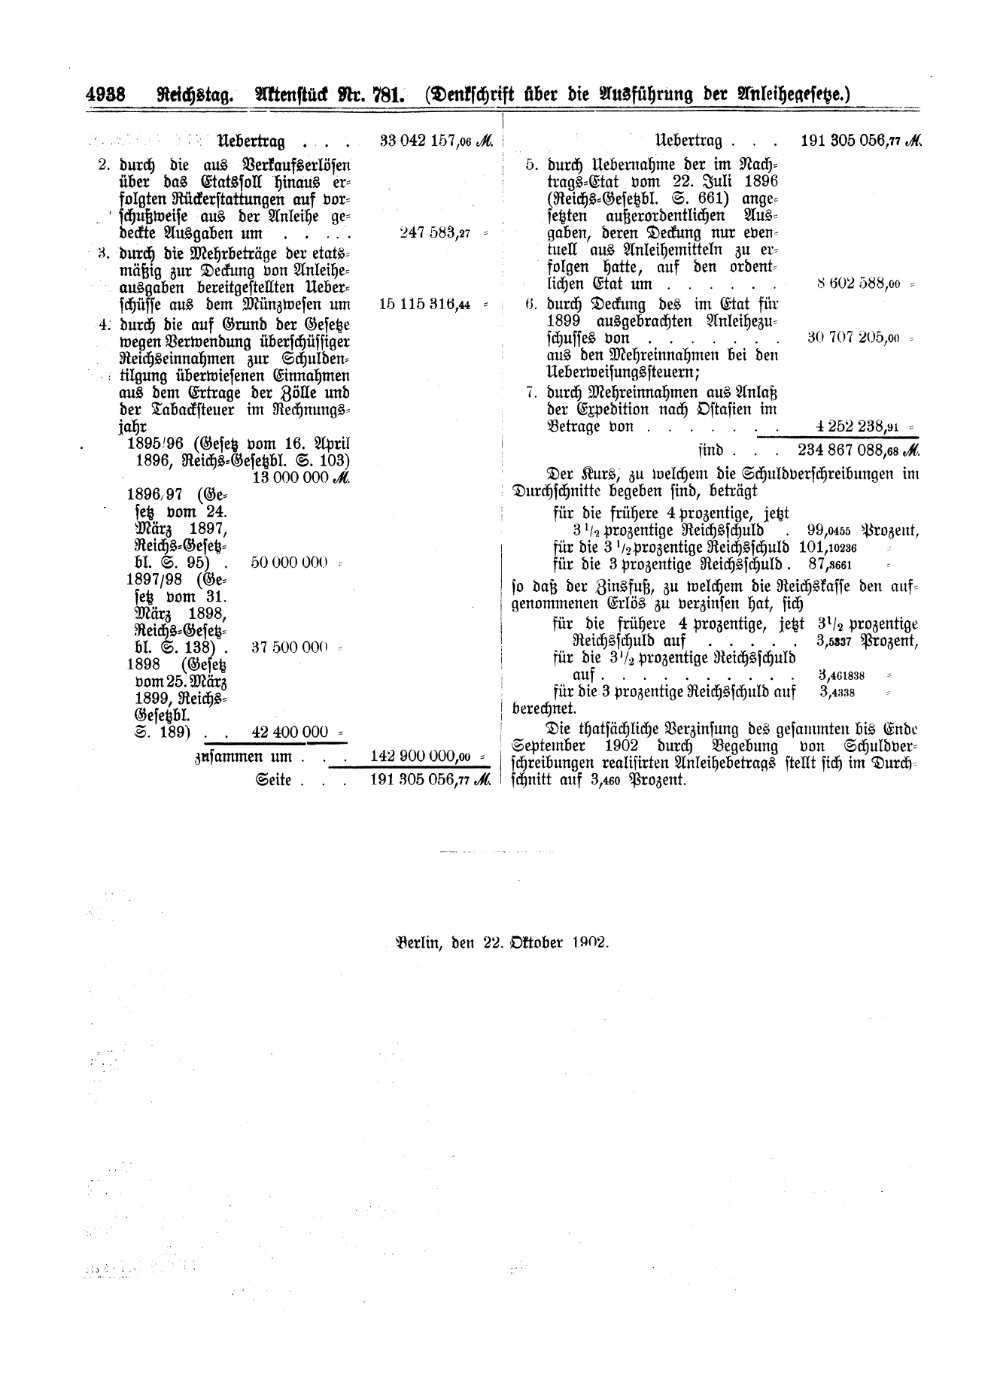 Scan of page 4938